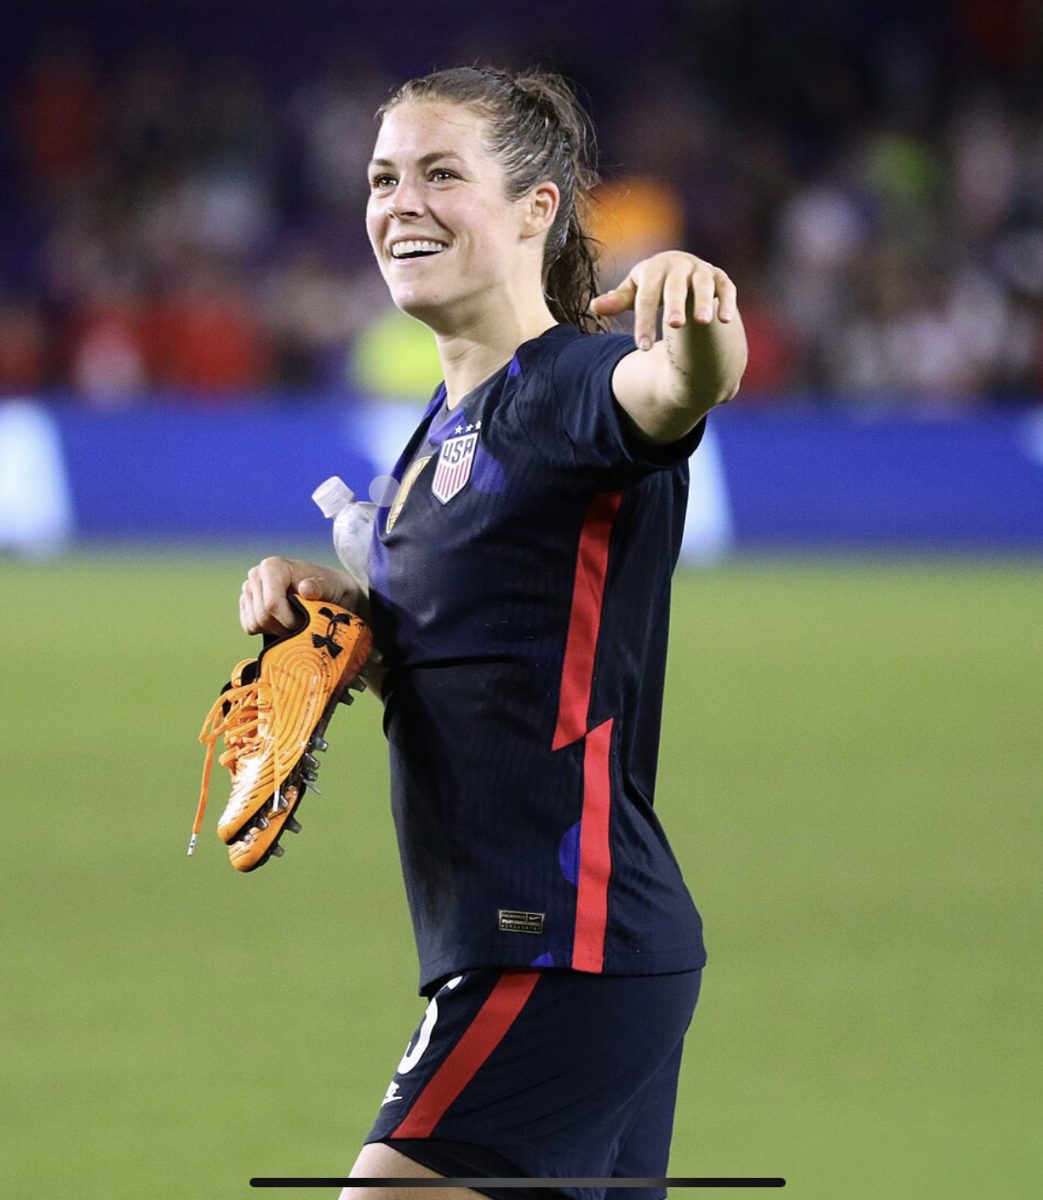 This is a recent image of Kelley O’Hara from March of 2020, one of her last few seasons in the world of professional soccer. (Photo Credit: Jamie Smed from Cincinnati, Ohio, CC BY 2.0 , via Wikimedia Commons)